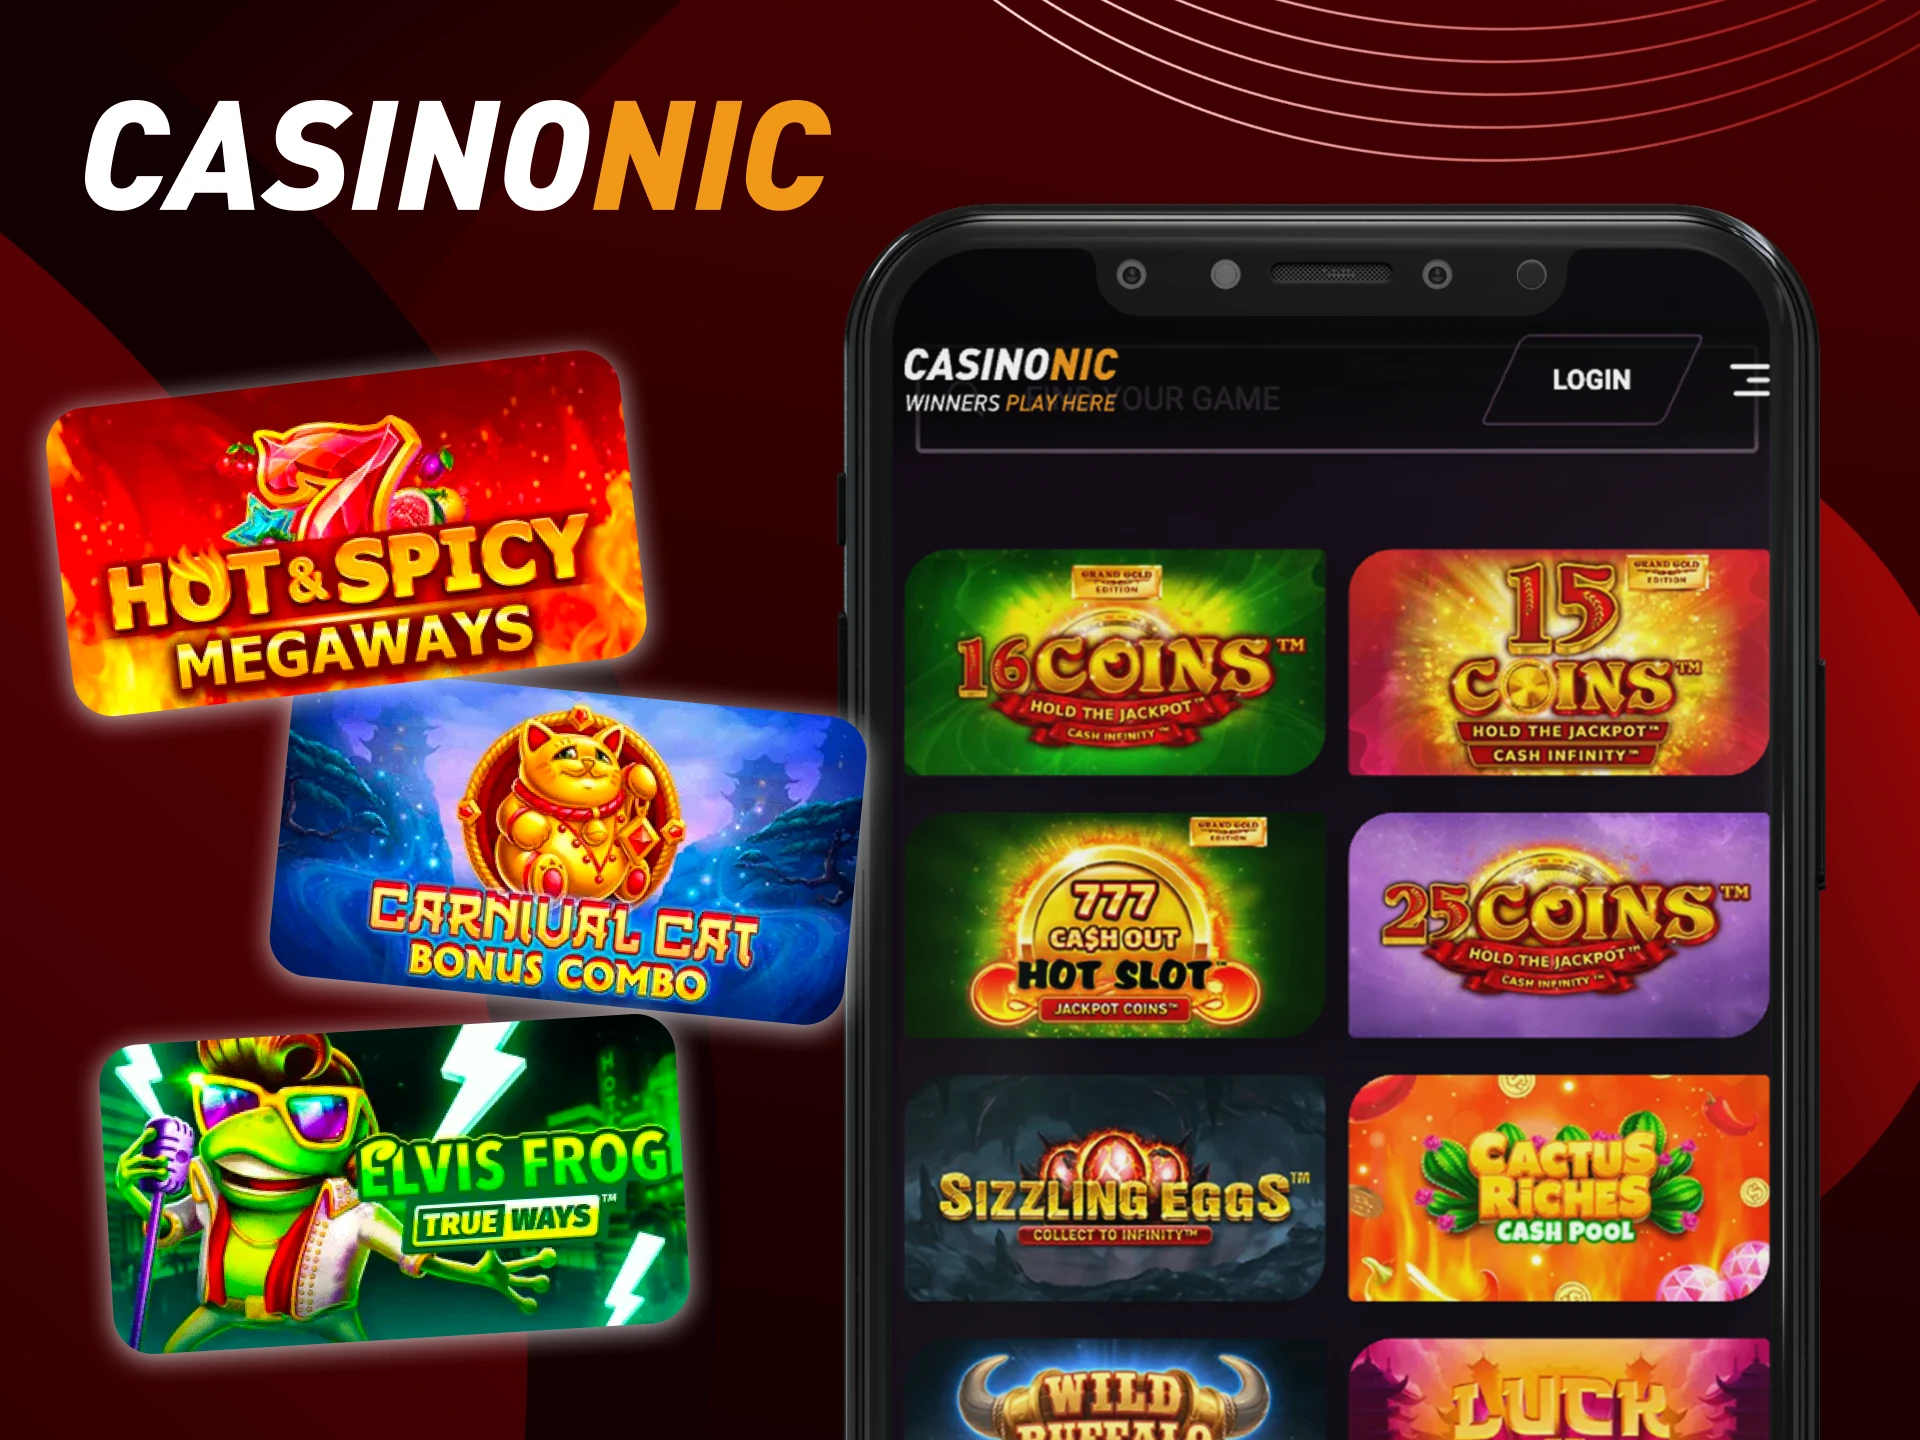 What is in the casino section of the online casino CasinoNic.